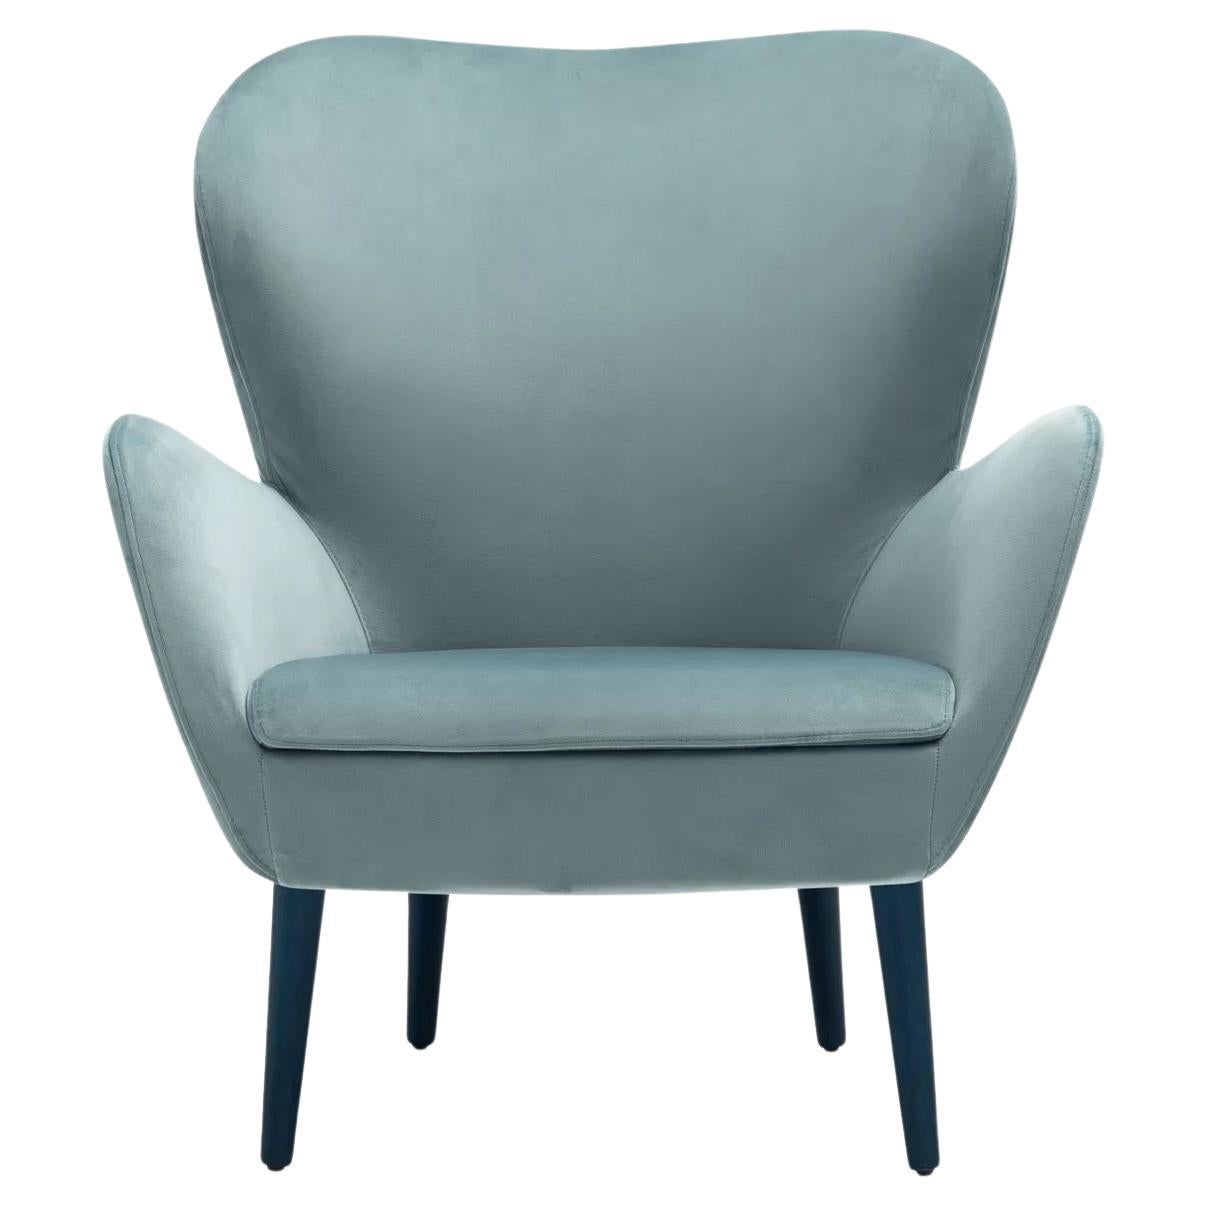 Retro Style Lounge Chair Offered in Velvet